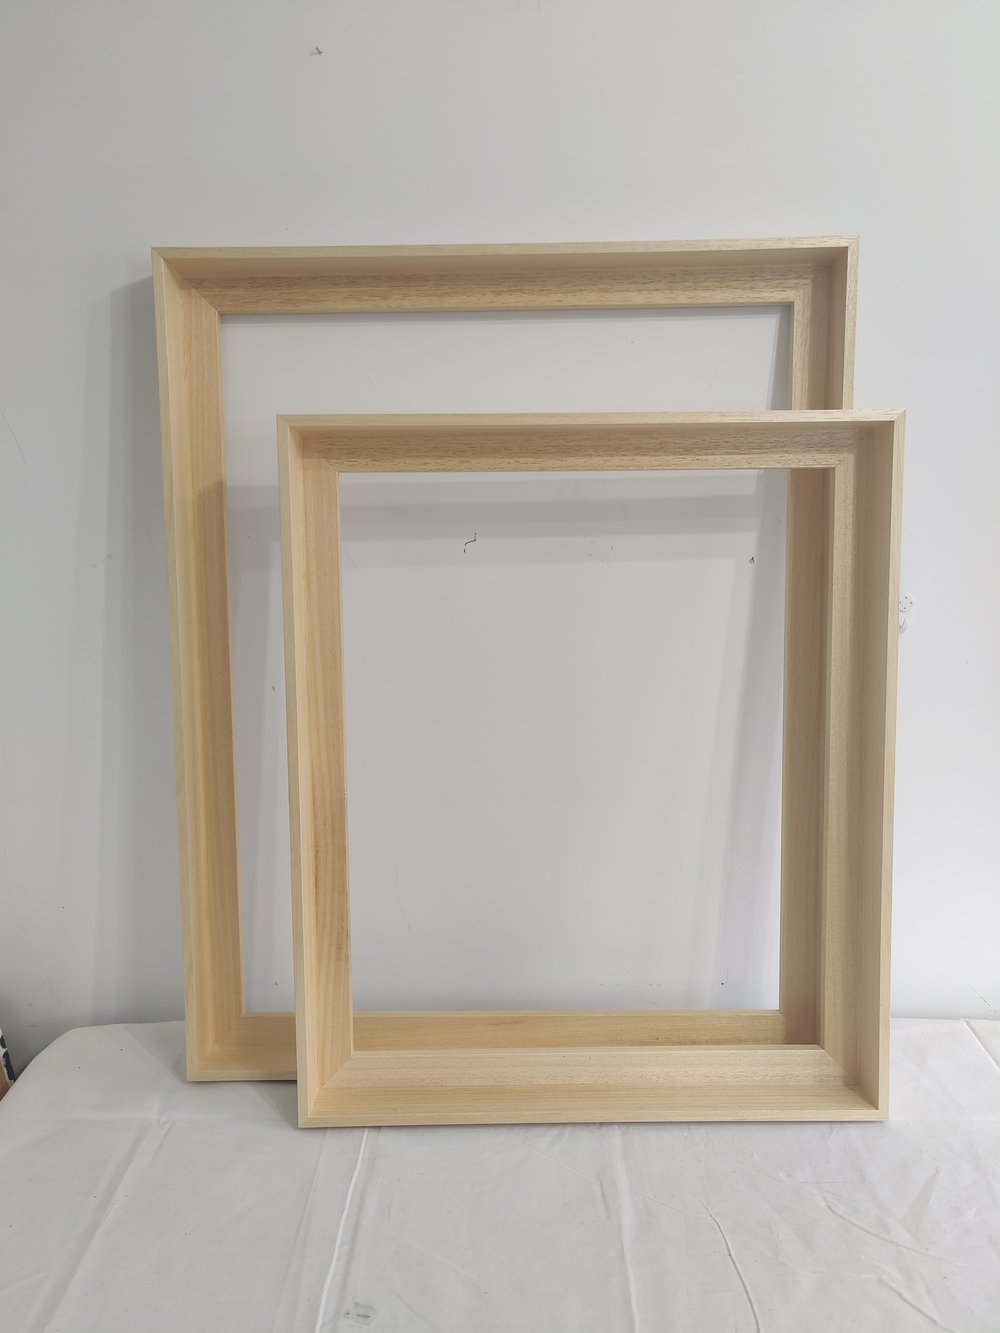 Wide Natural Brown Reclaimed Wood Picture Frames – Mutual Adoration + POST